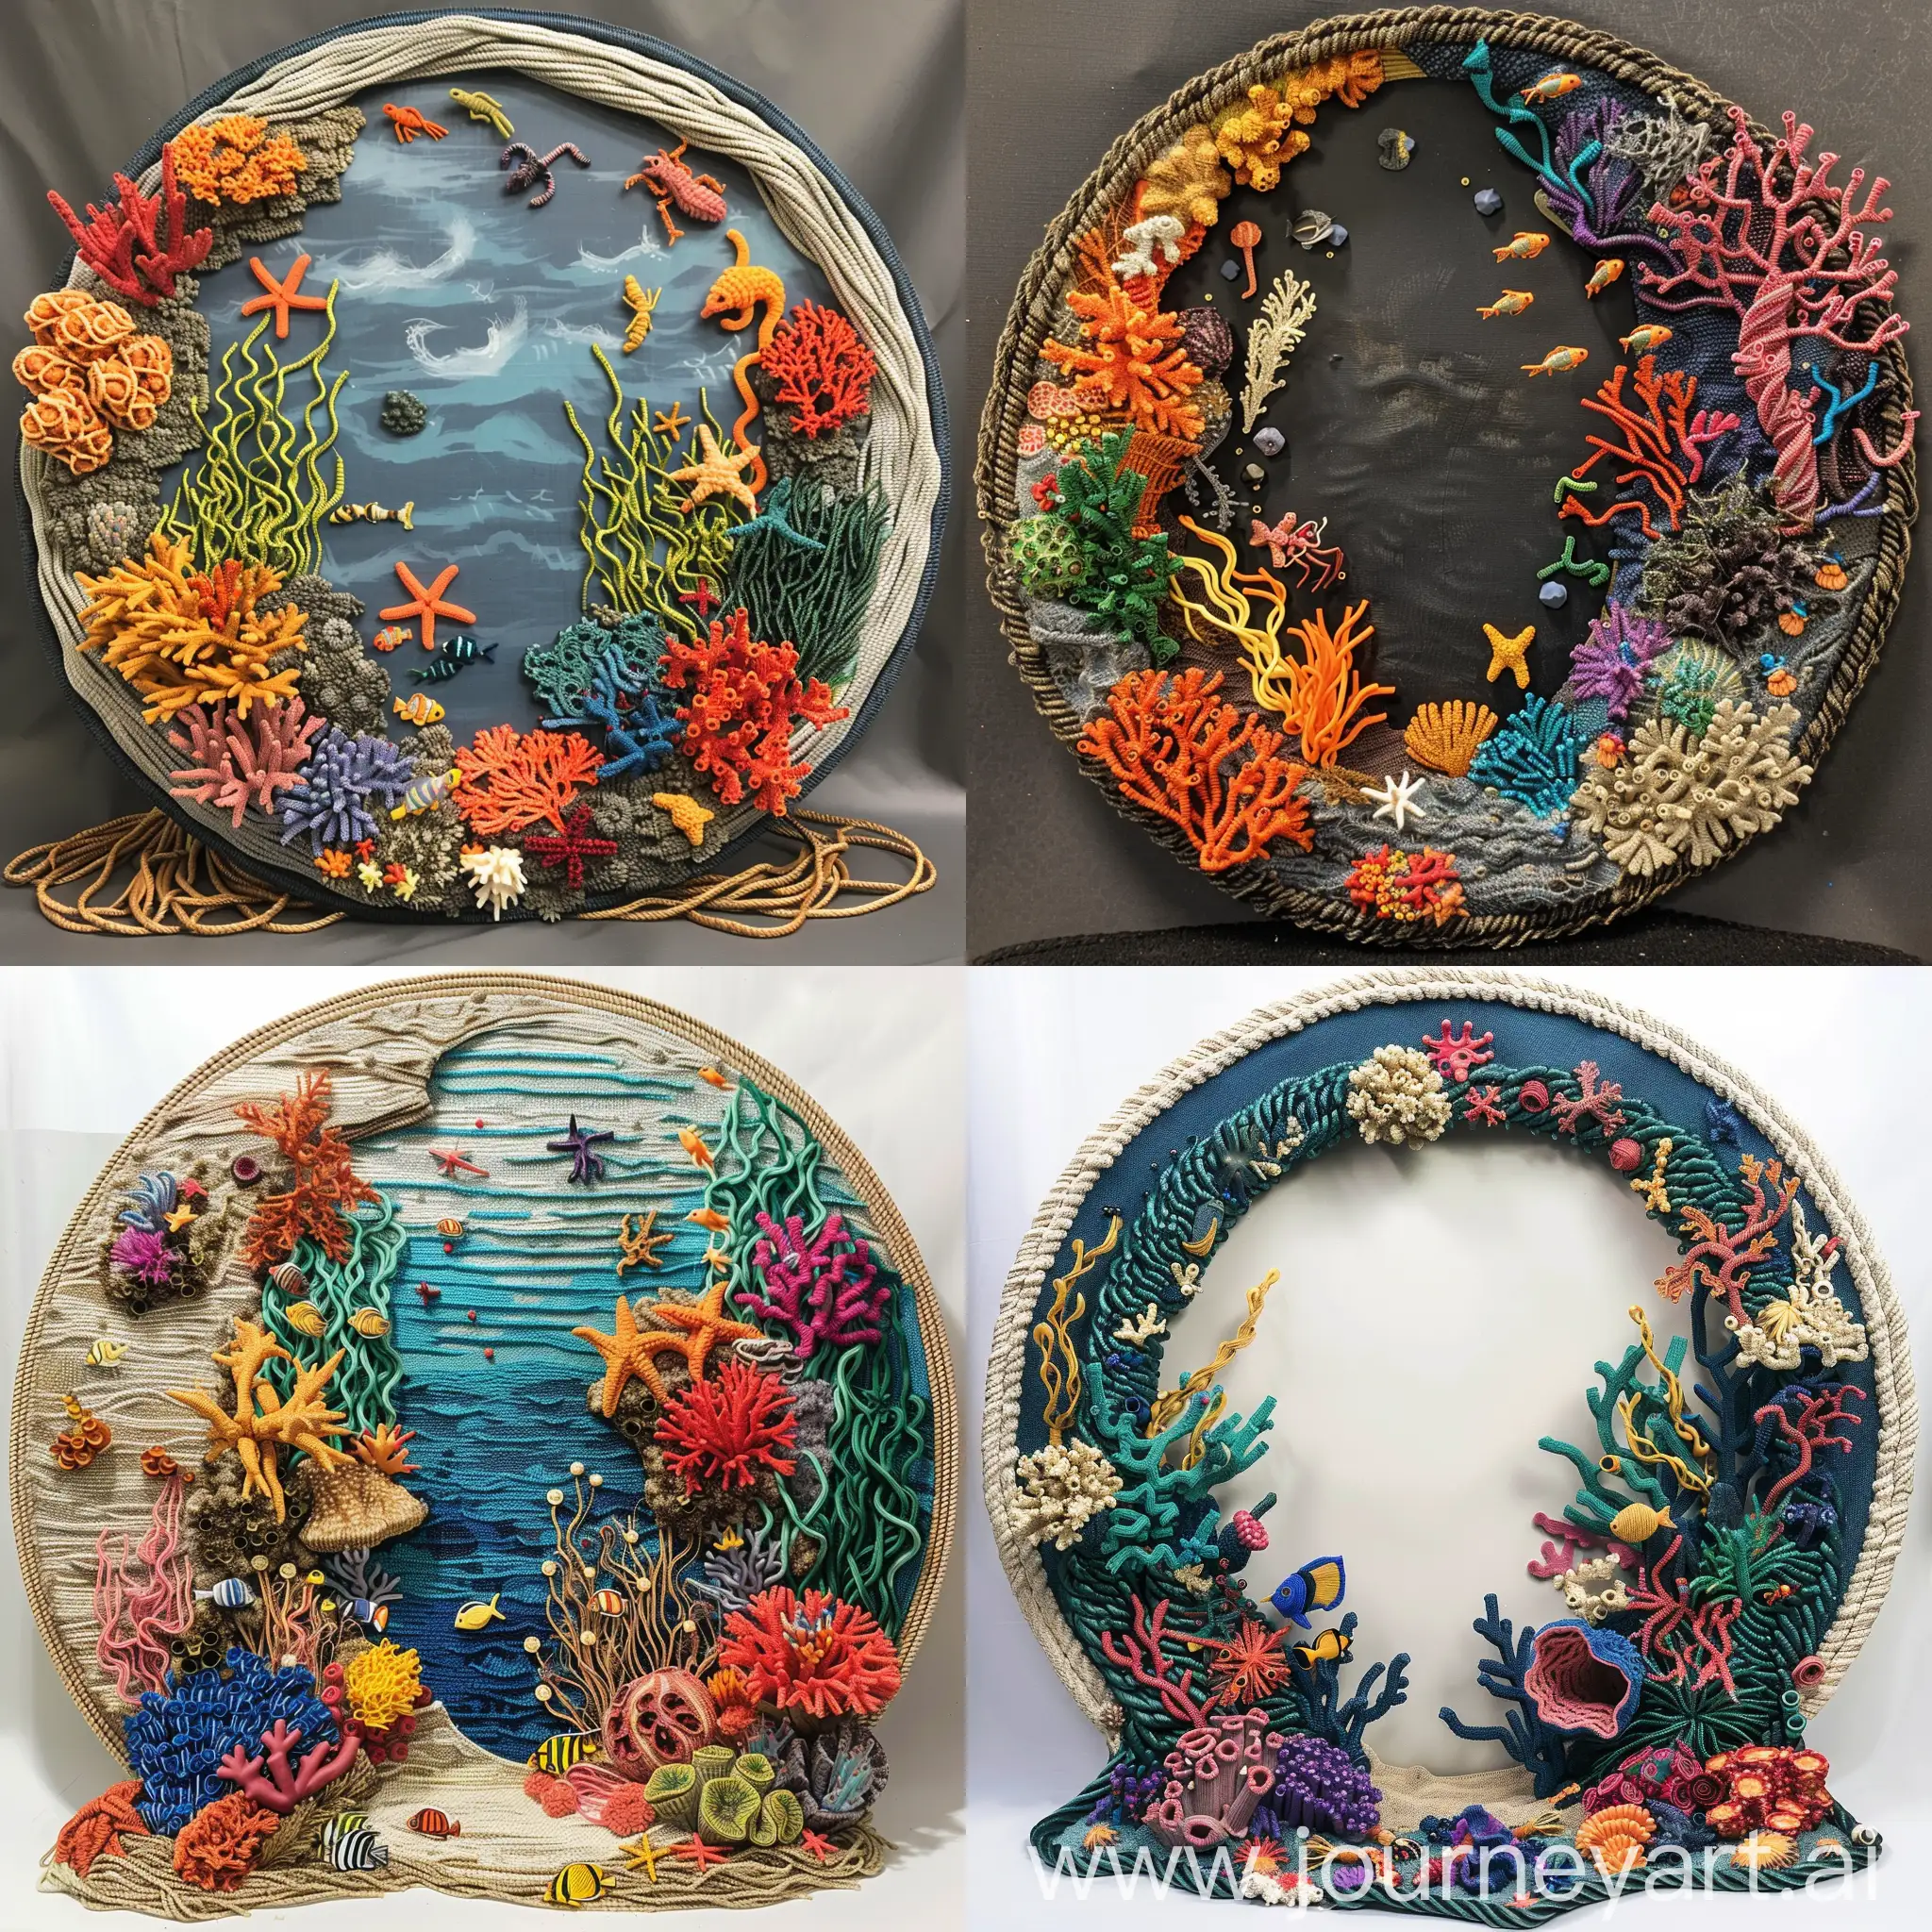 Disk shape art peice, a coral reef an the left and right sides and sea creatures of all types scattered across the project.  All to be made out of rope